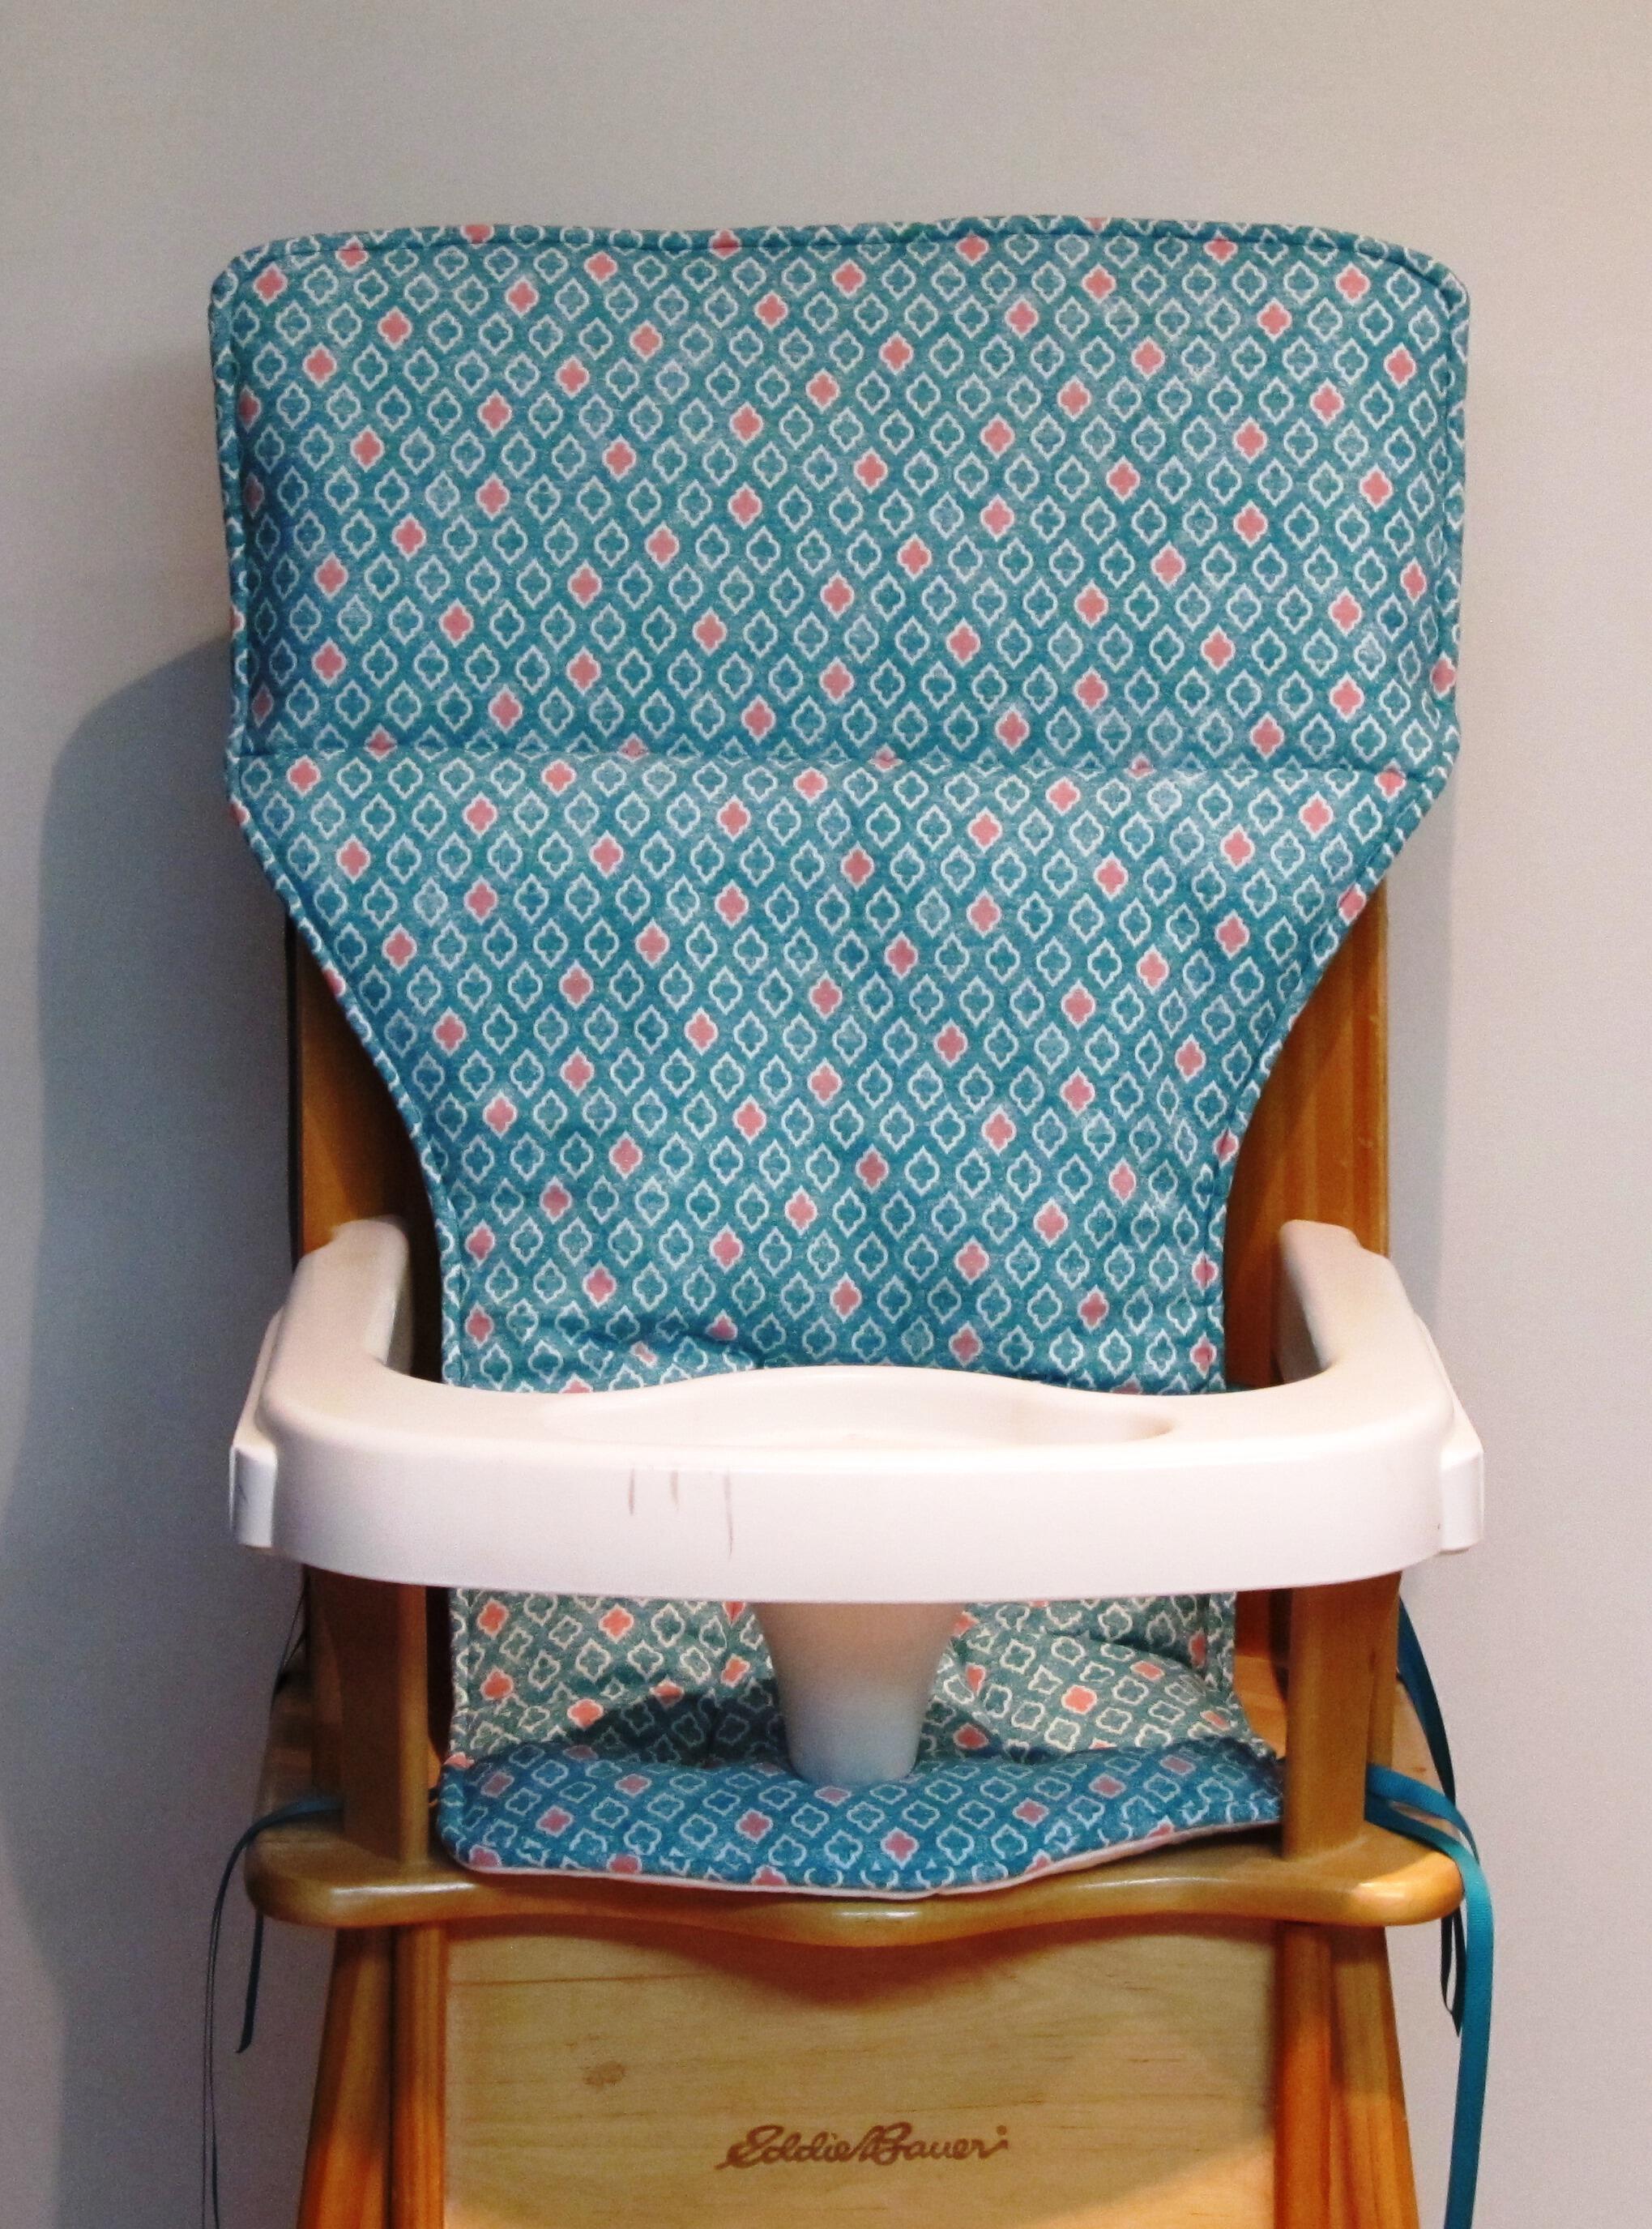 replacement highchair pad for wooden Eddie Bauer chairs